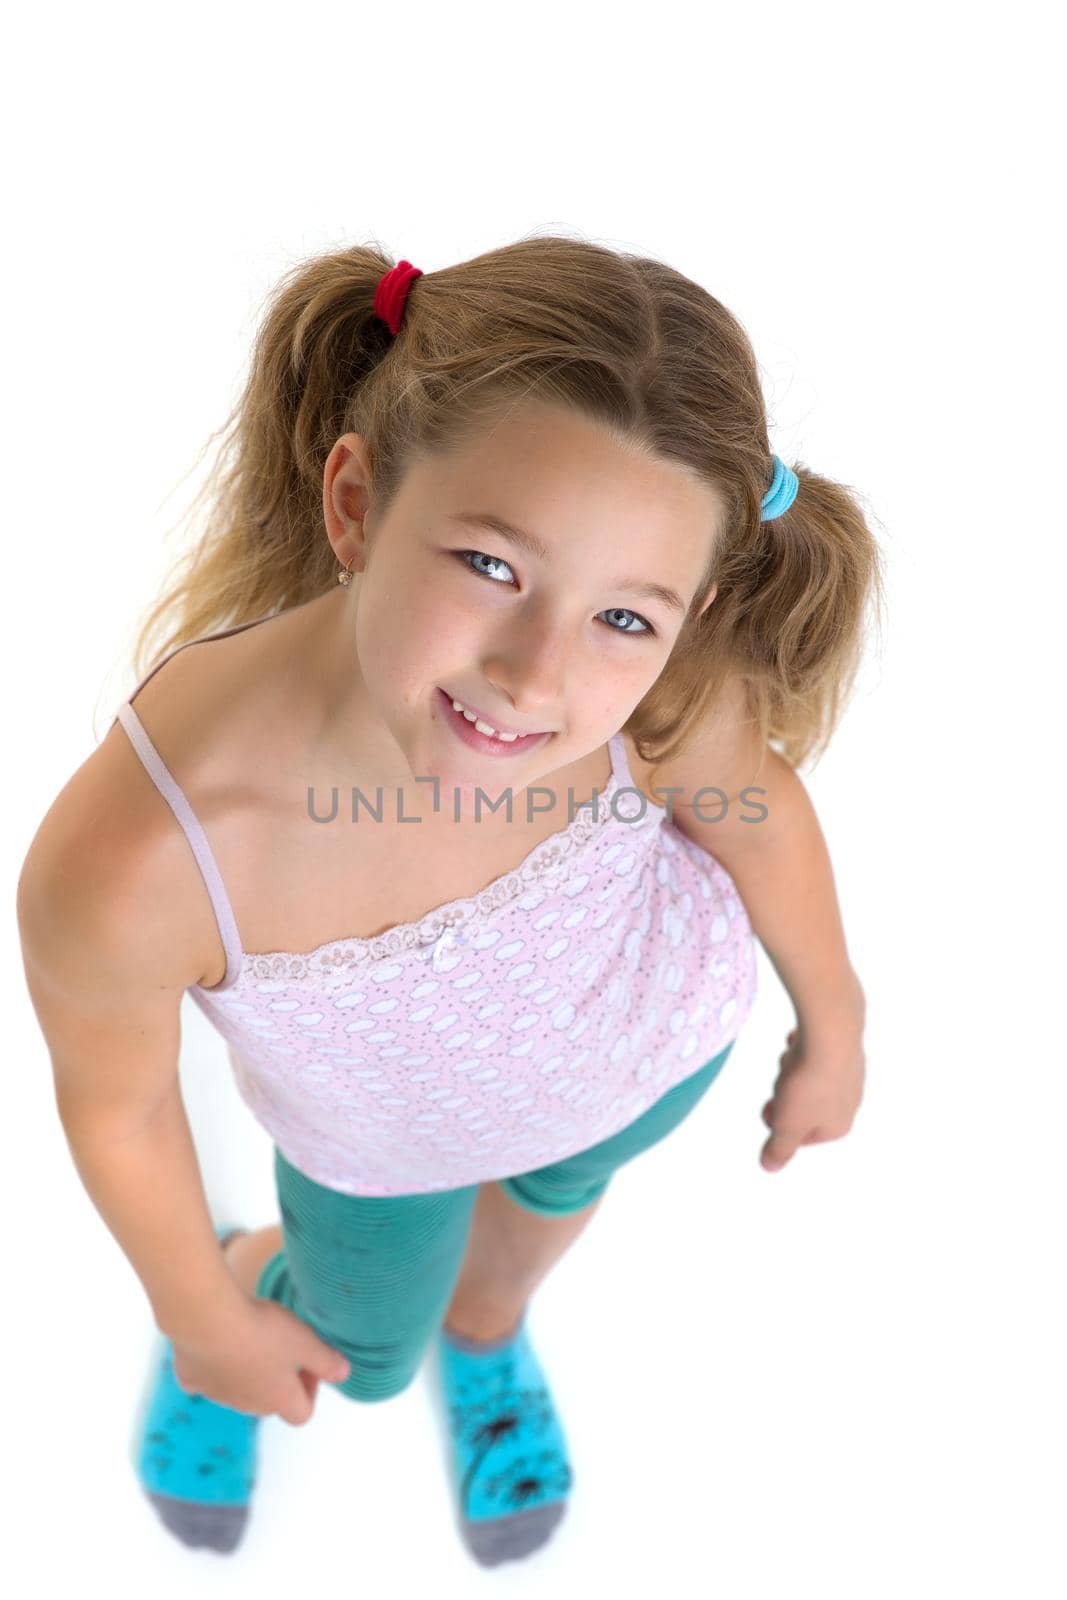 Preteen girl looking up at camera. Above view portrait of child posing in studio against white background. Cute girl wearing casual clothes